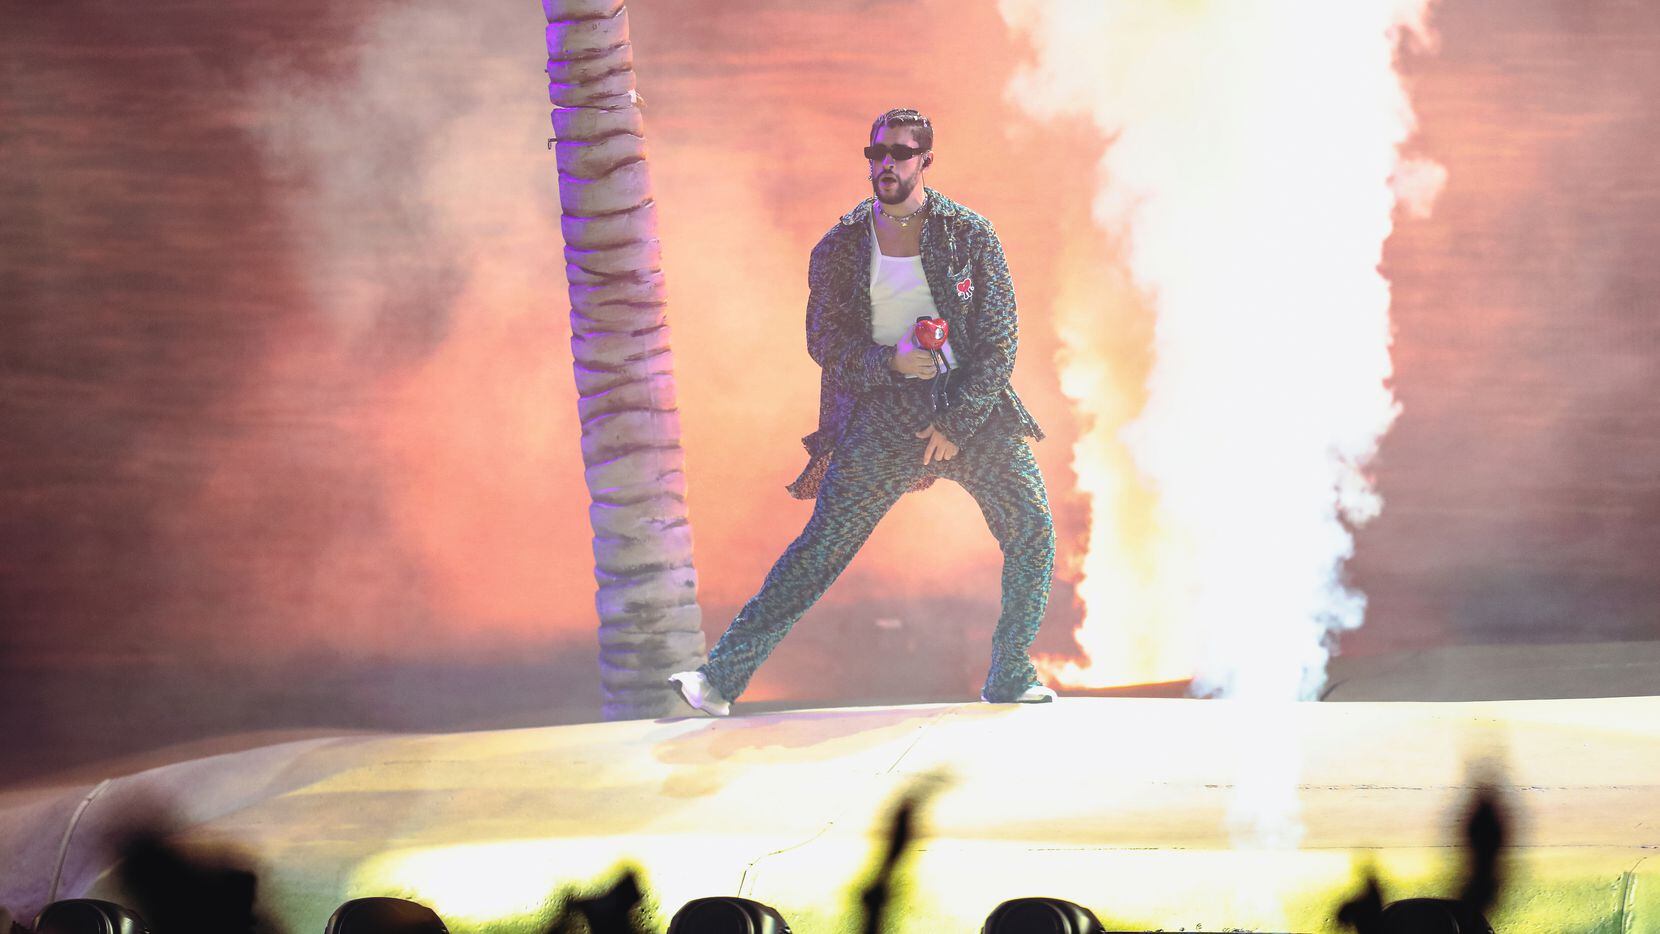 Fans at Bad Bunny's concert came dressed as boldly as their fave